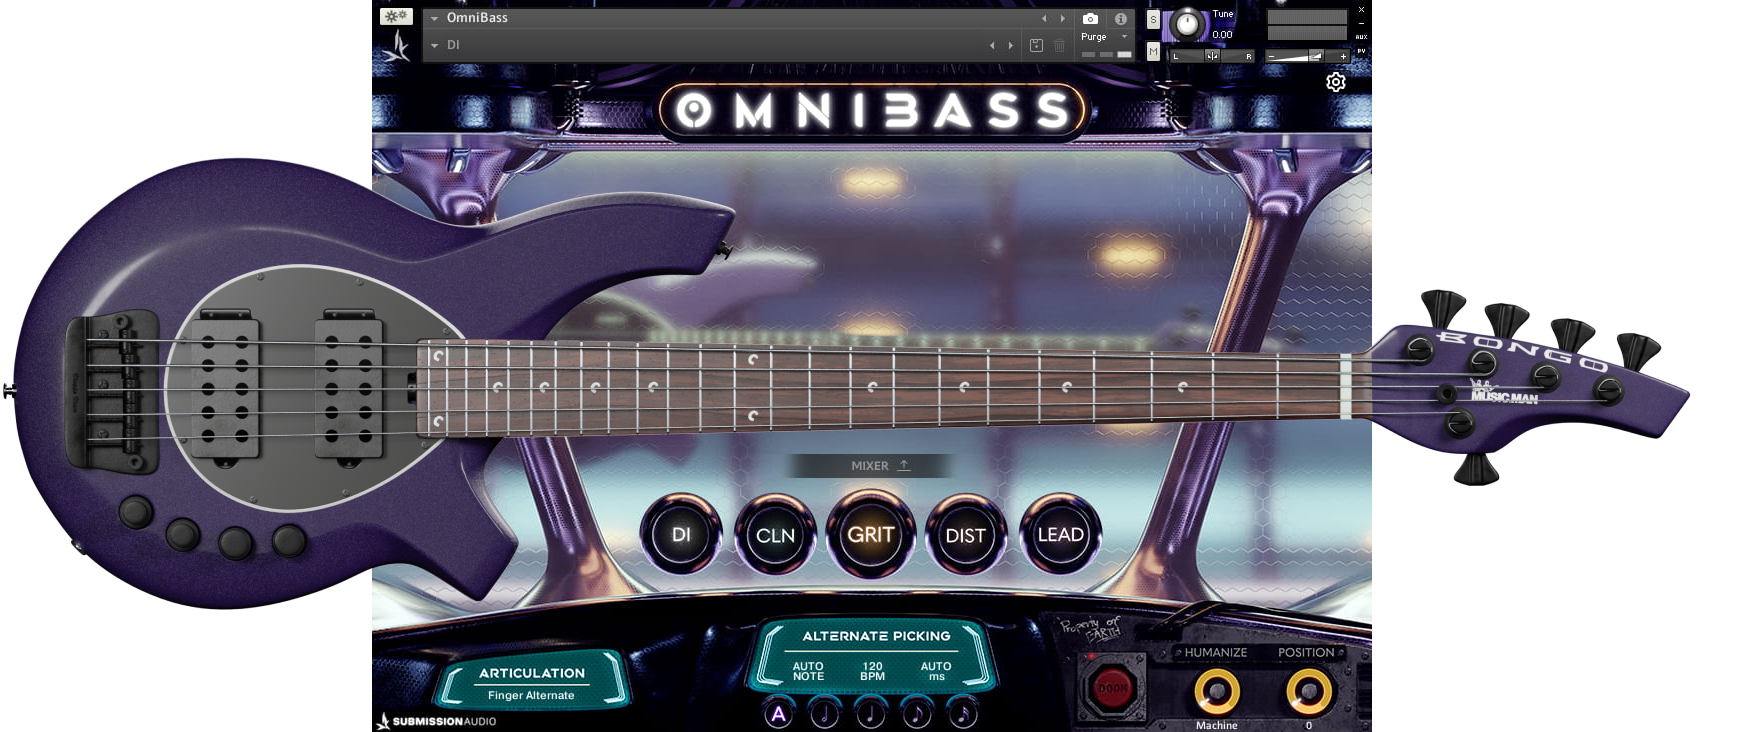 omnibass-overview-img.png__PID:dadf4bcf-6661-4b4e-b28f-681a5017b504